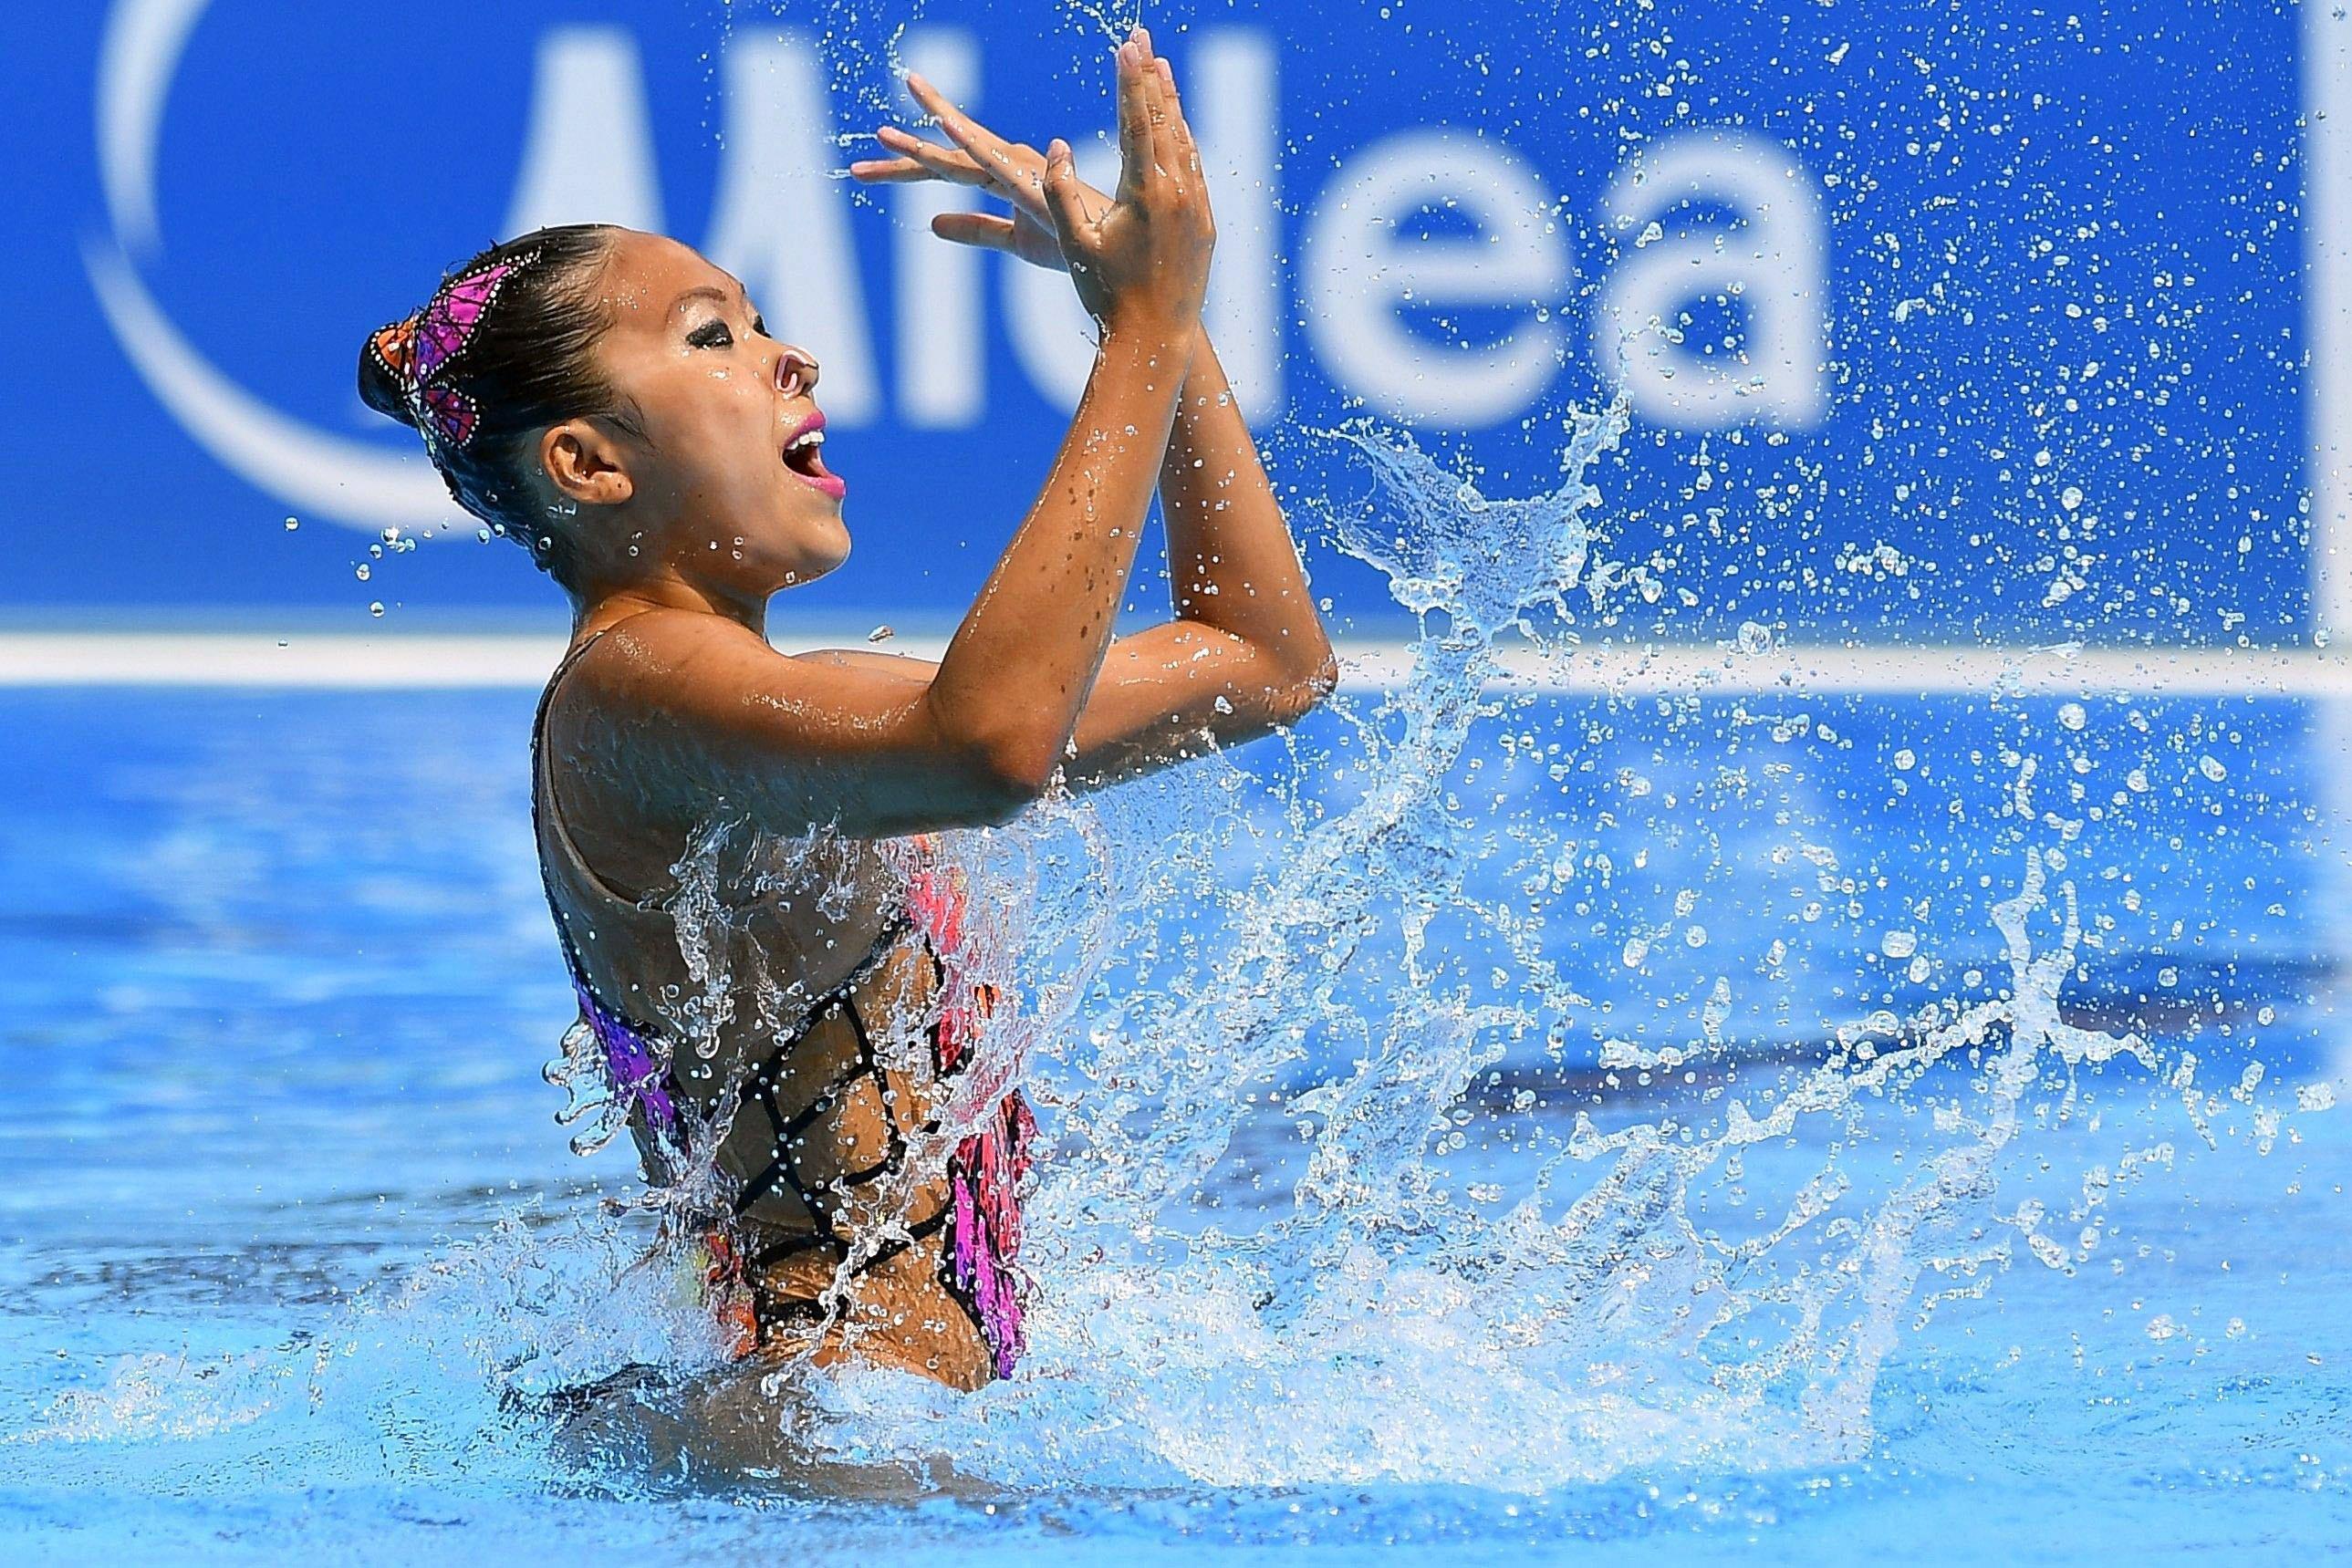 epa06086431 Debbie Soh of Singapore performs during the Women's Solo Technical Synchronised Swimming Preliminary Technical Routine of the FINA World Championships 2017 in Budapest, Hungary, 14 July 2017. The FINA Swimming World Championships 2017 runs from 14 to 30 July in Hungary.  EPA/ZSOLT CZEGLEDI HUNGARY OUT